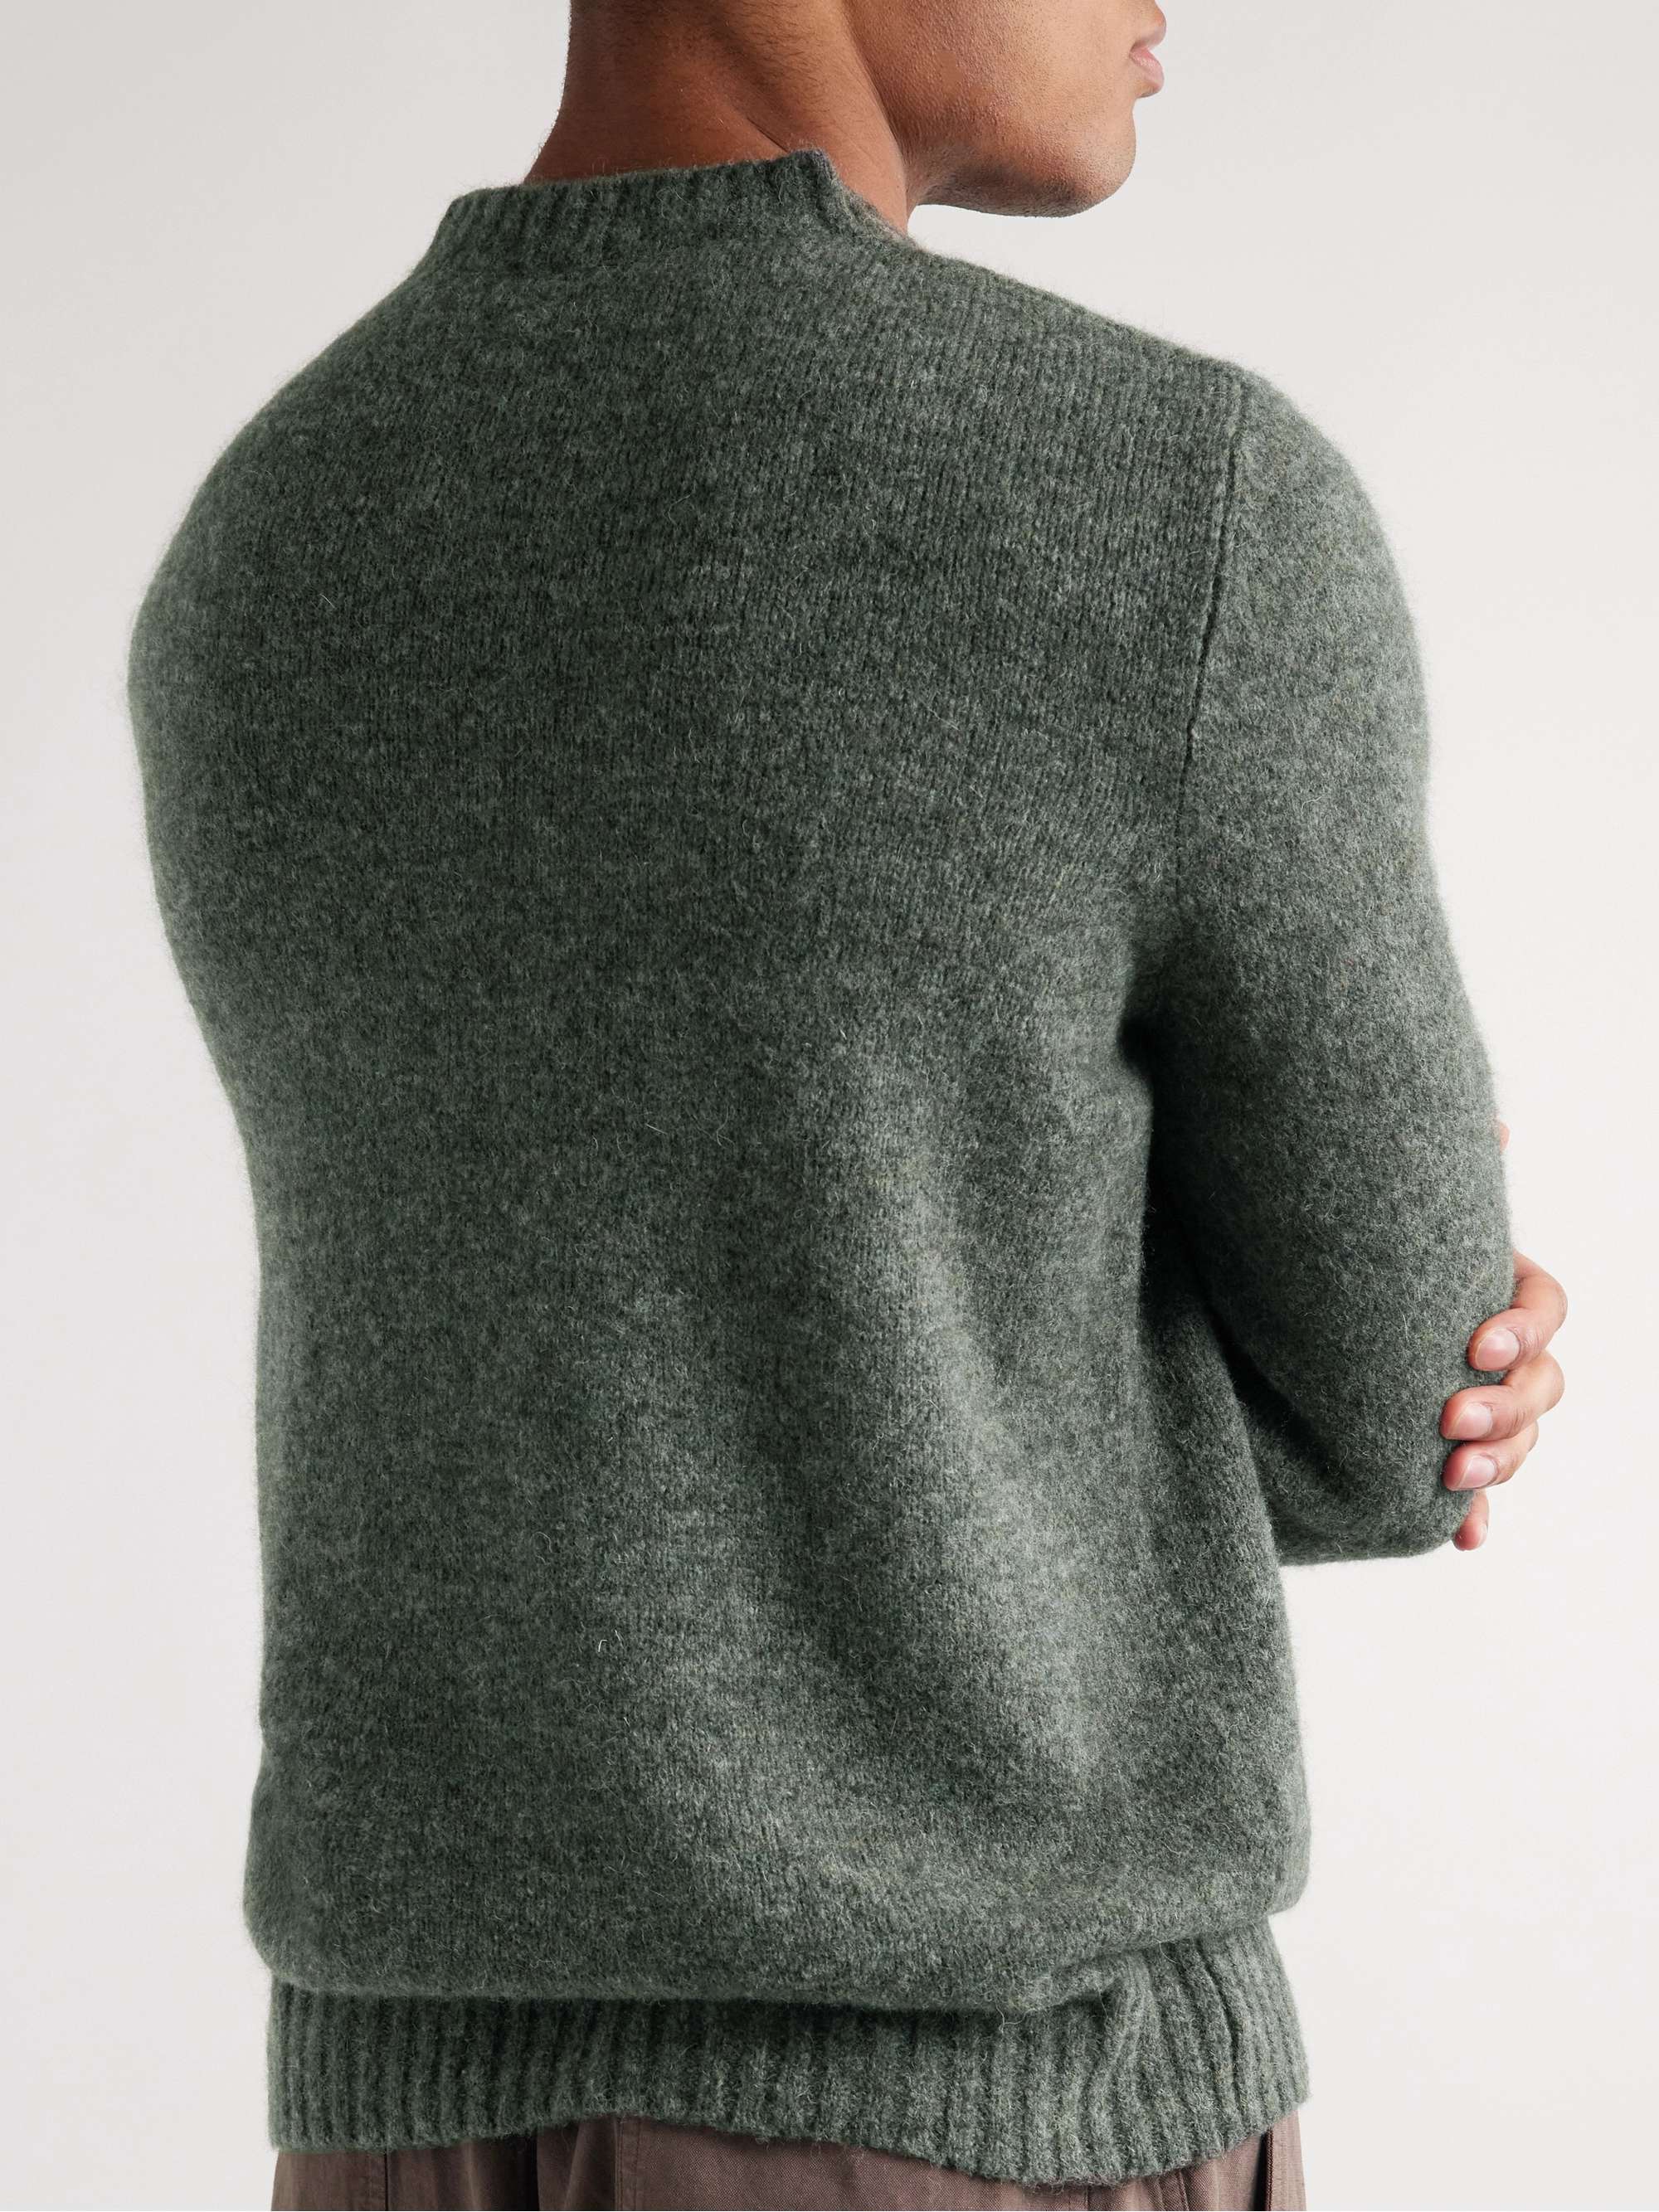 A.P.C. Lucas Brushed Knitted Sweater